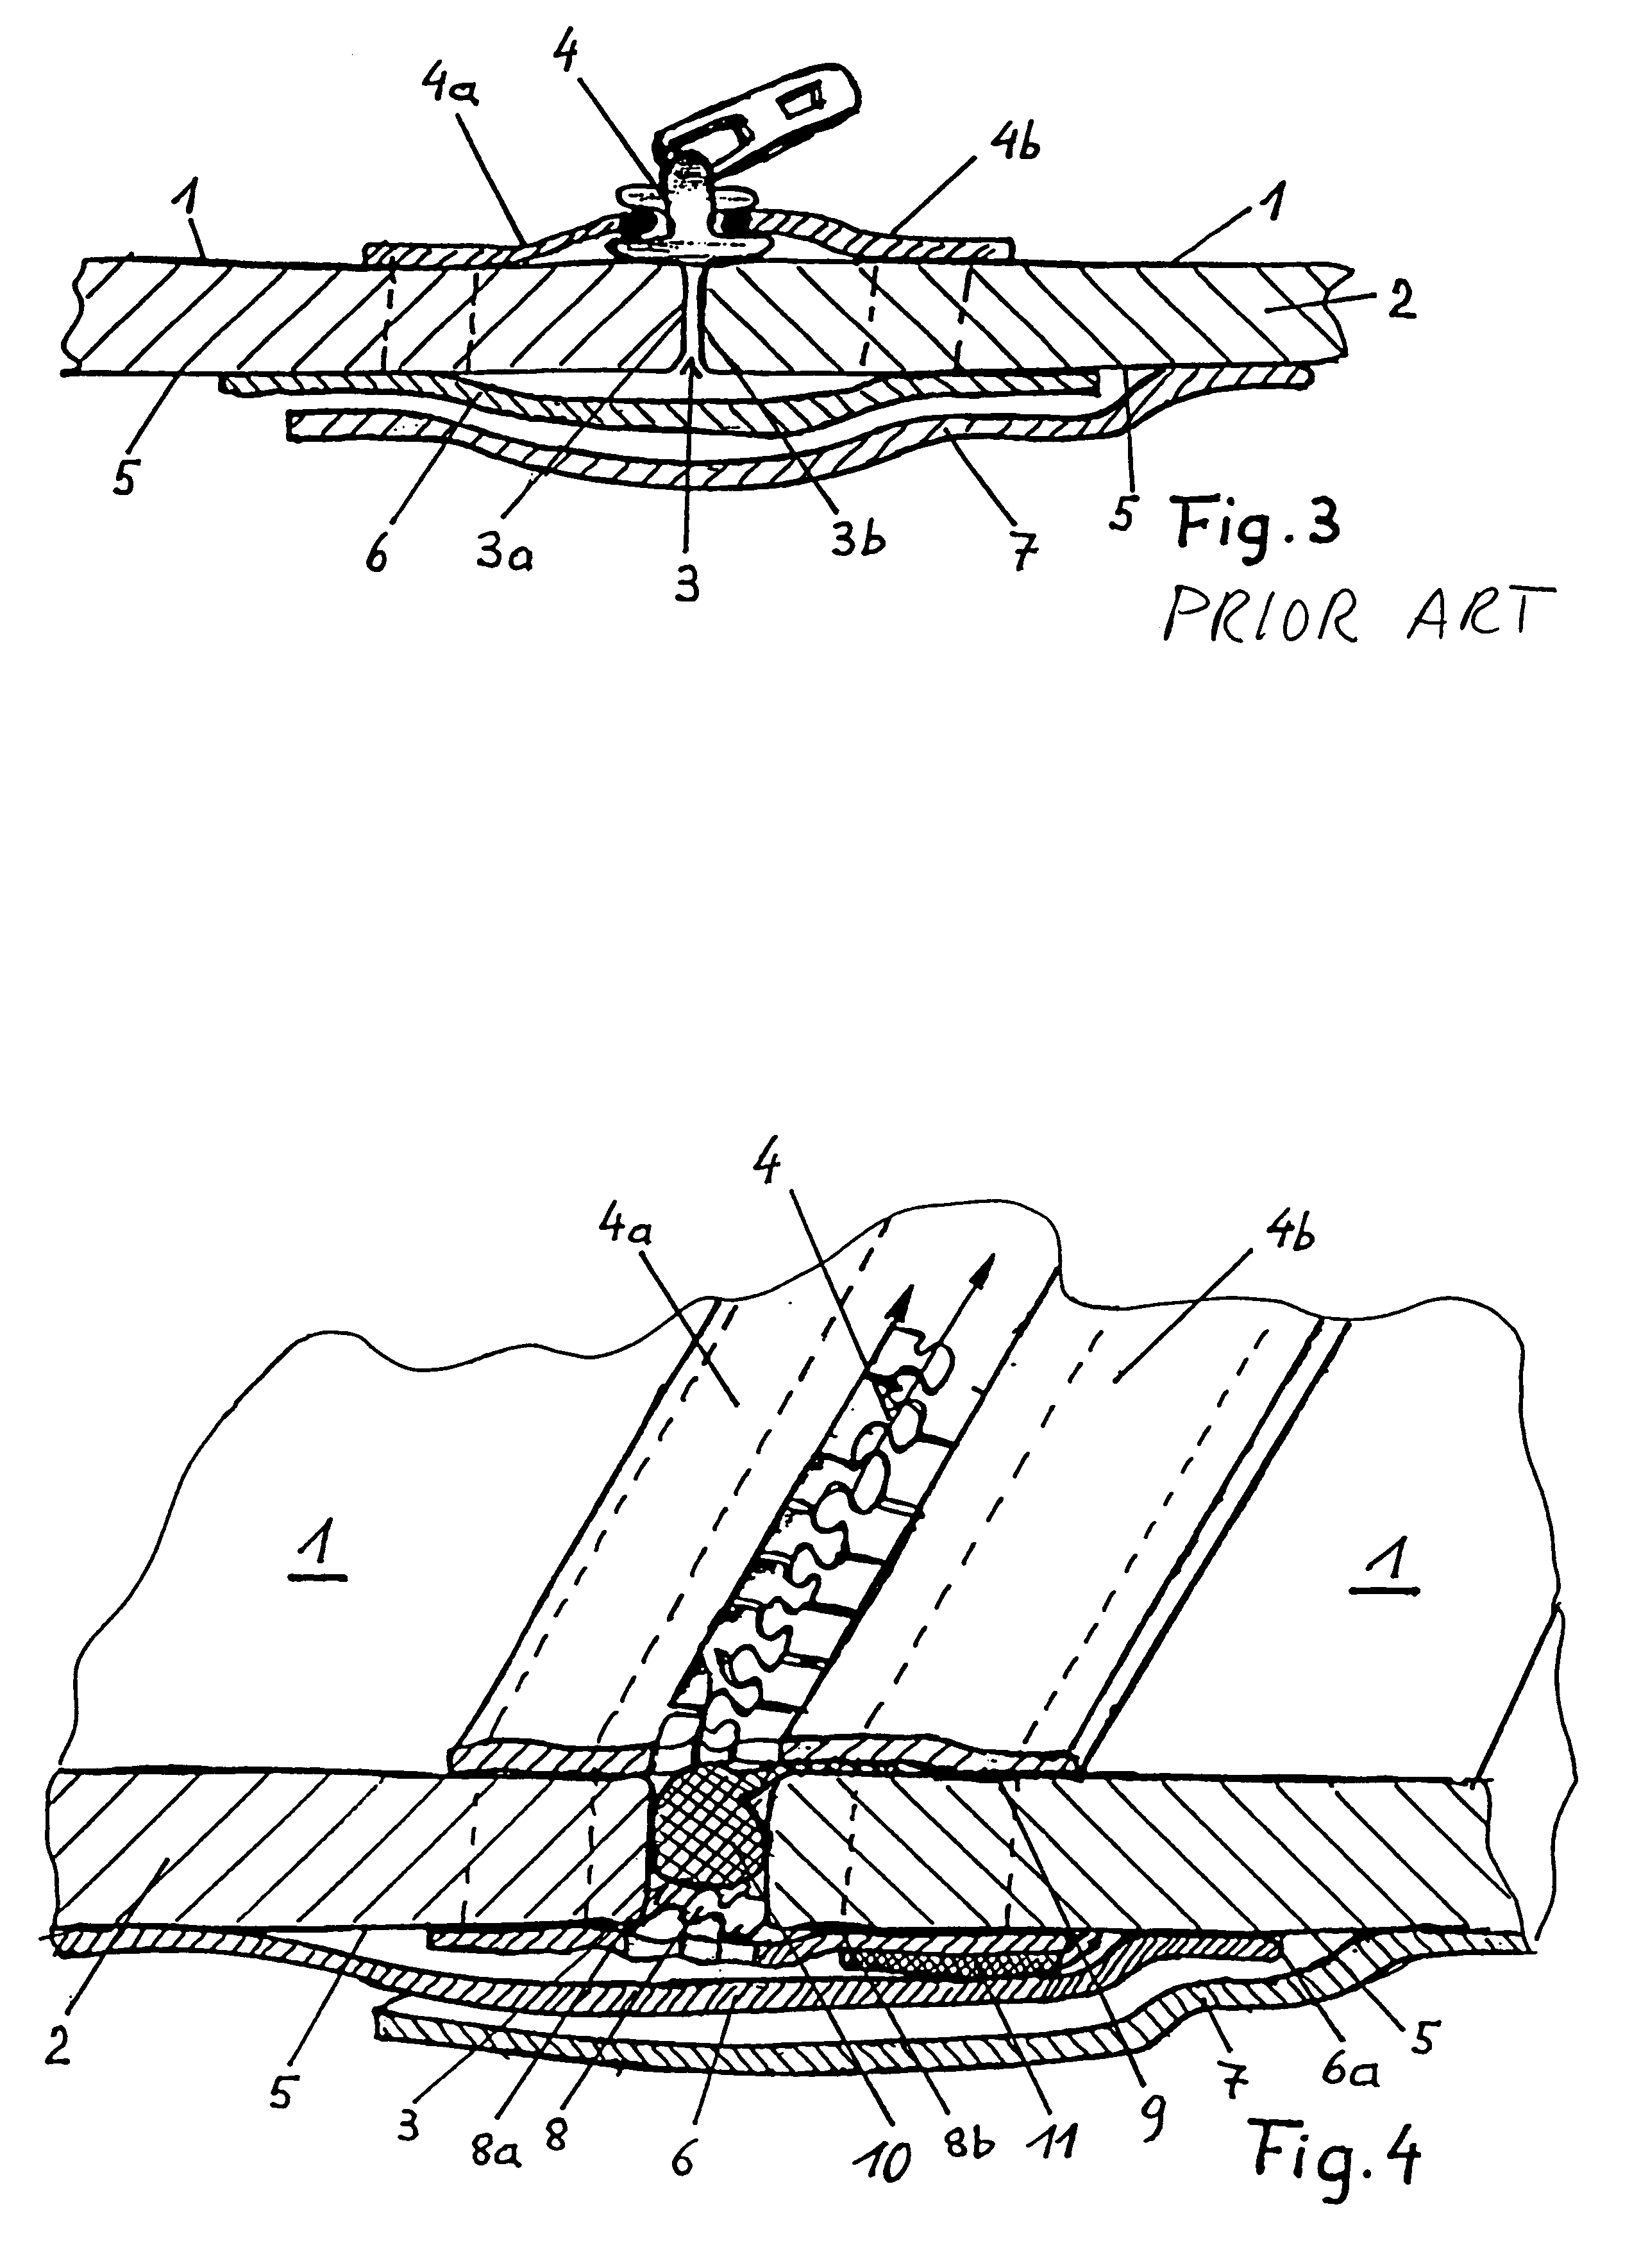 Closure device for slit opening of aquatic sport suit